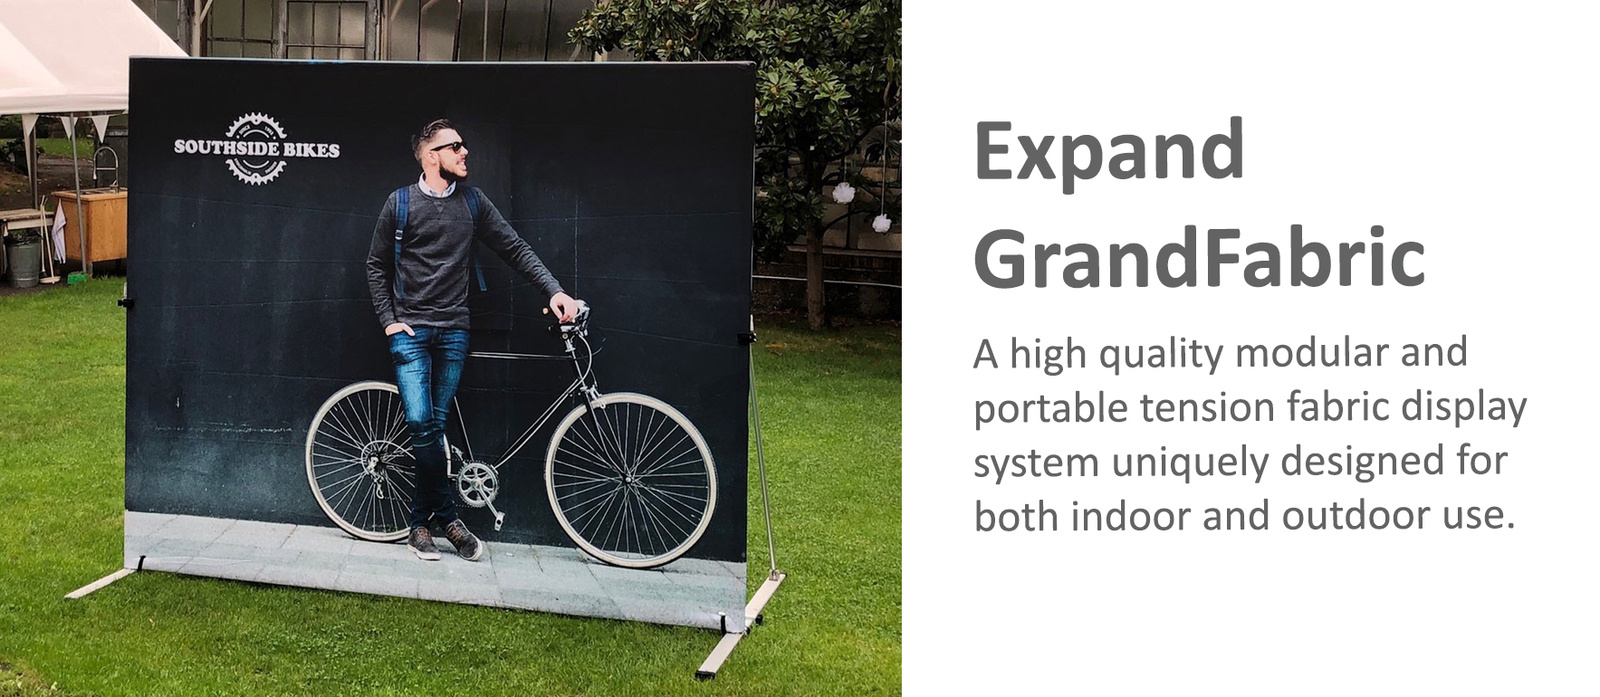 Introducing Our New Expand GrandFabric